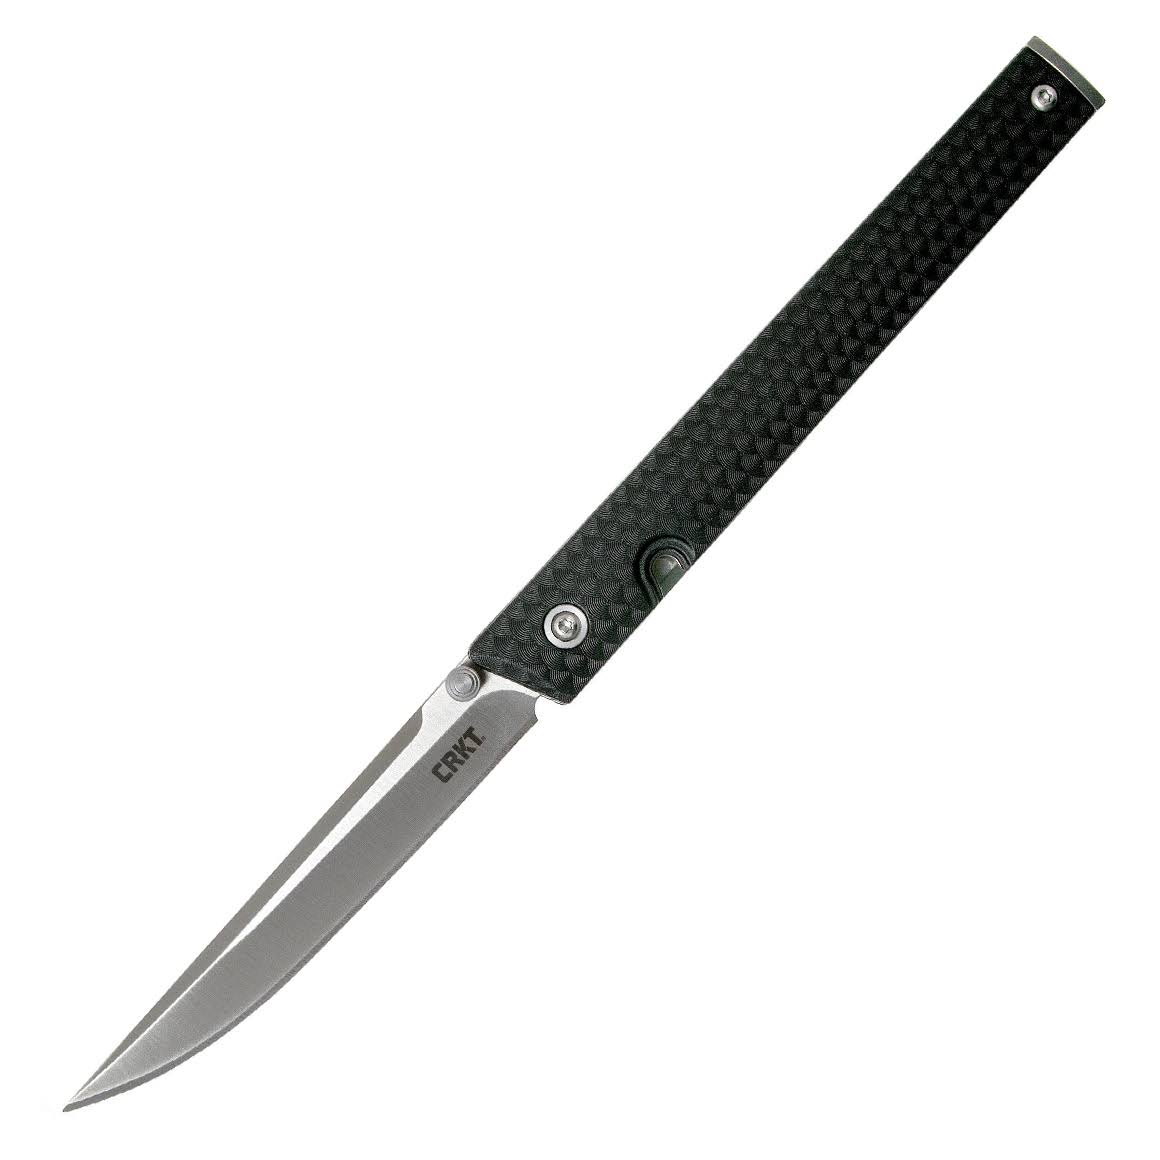 Crkt Ceo Folding Knife - 3.11", With Locking Liner